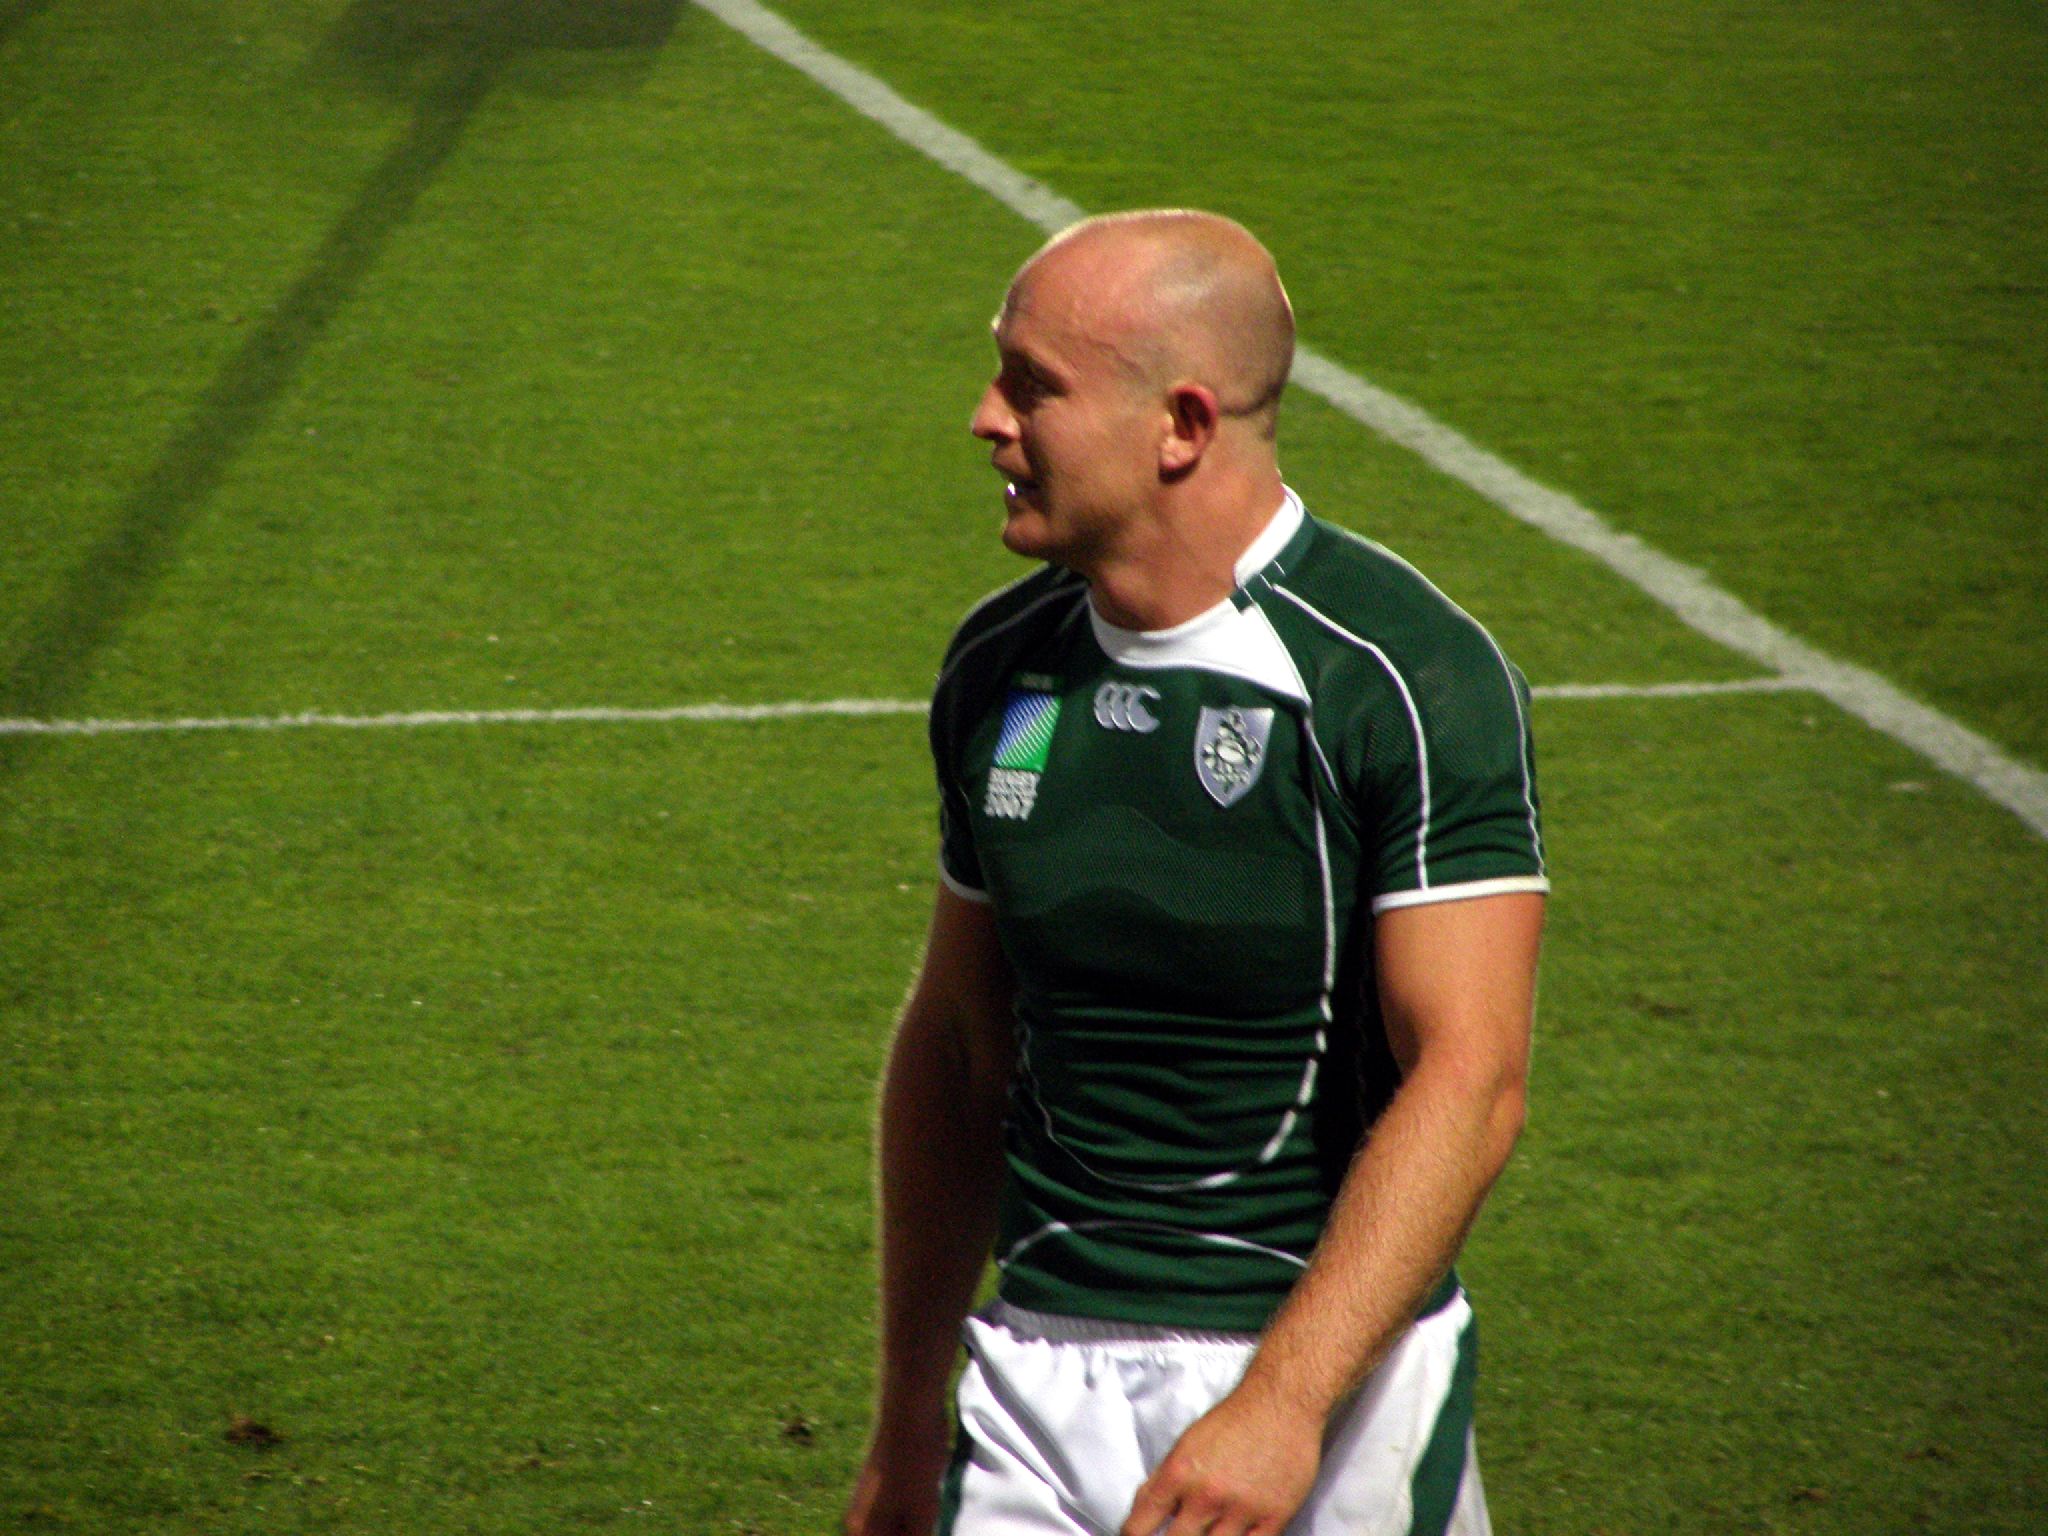 Hickie playing for Ireland vs Georgia during the 2007 Rugby World Cup